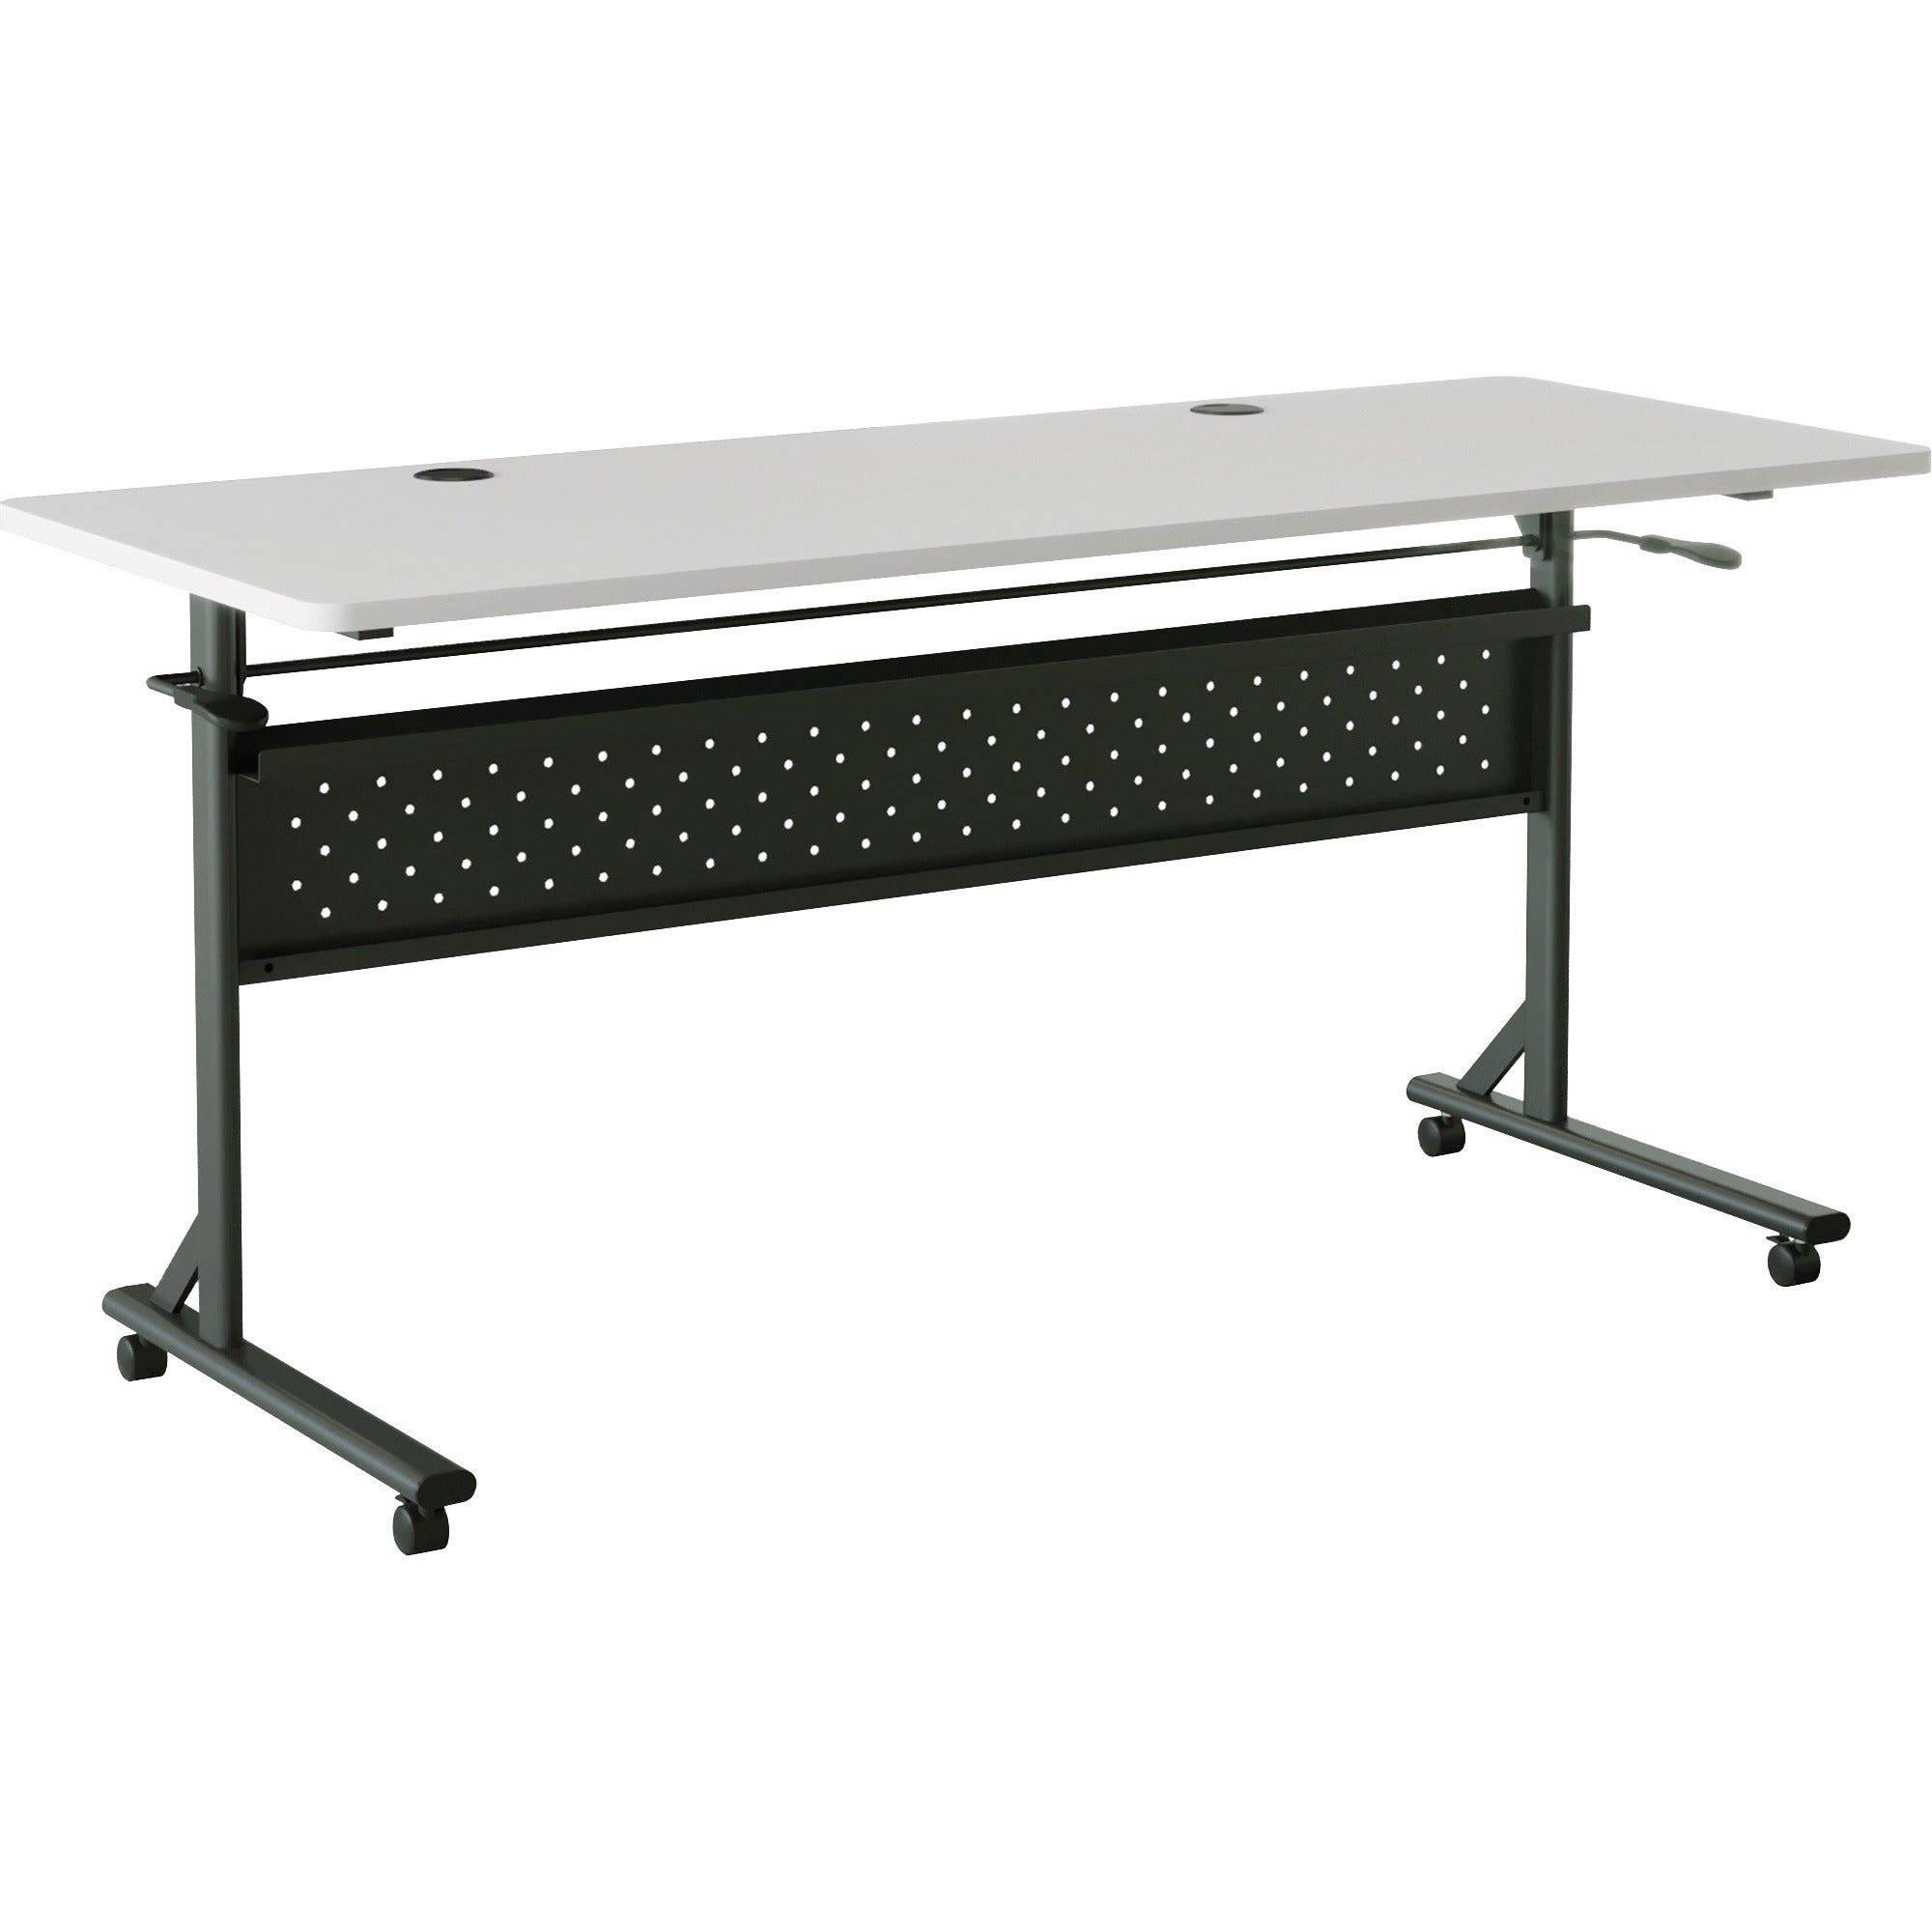 lorell-shift-20-flip-and-nesting-mobile-table-for-table-toplaminated-rectangle-top-60-table-top-length-x-24-table-top-width-x-1-table-top-thickness-2950-height-assembly-required-gray-1-each_llr60766 - 1